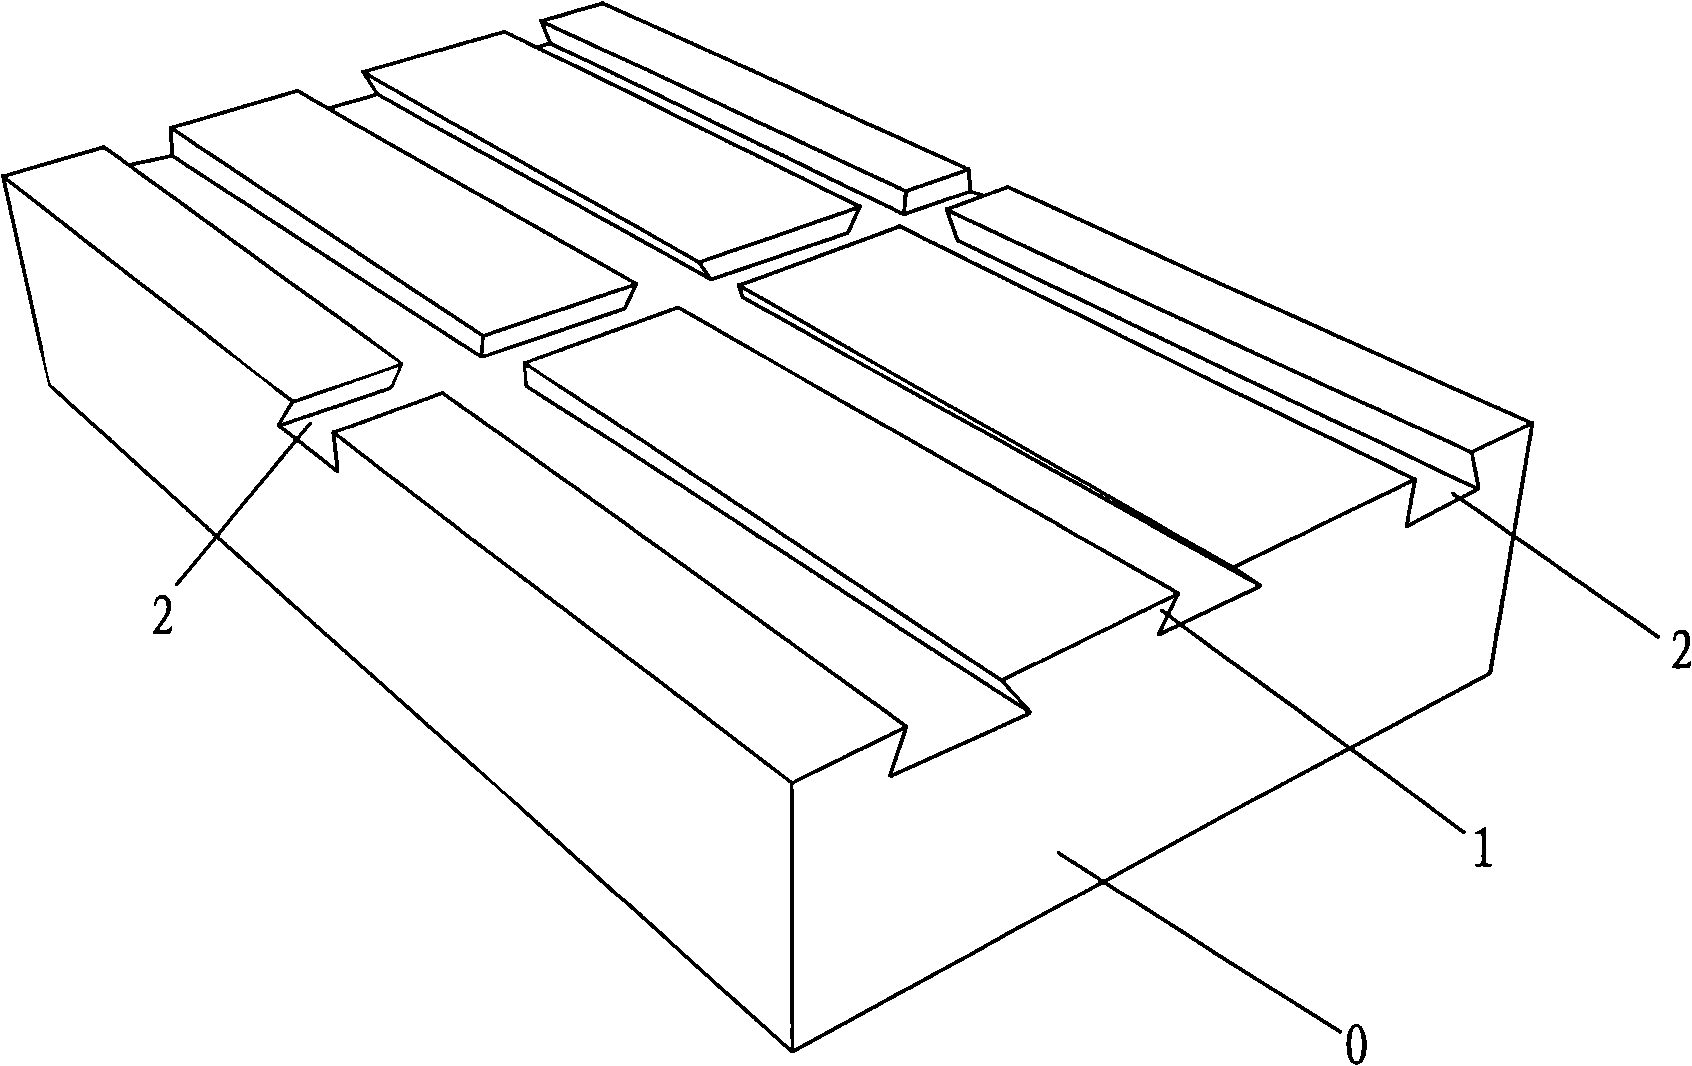 Integrated plate of high strength bonding and thermal insulation facing